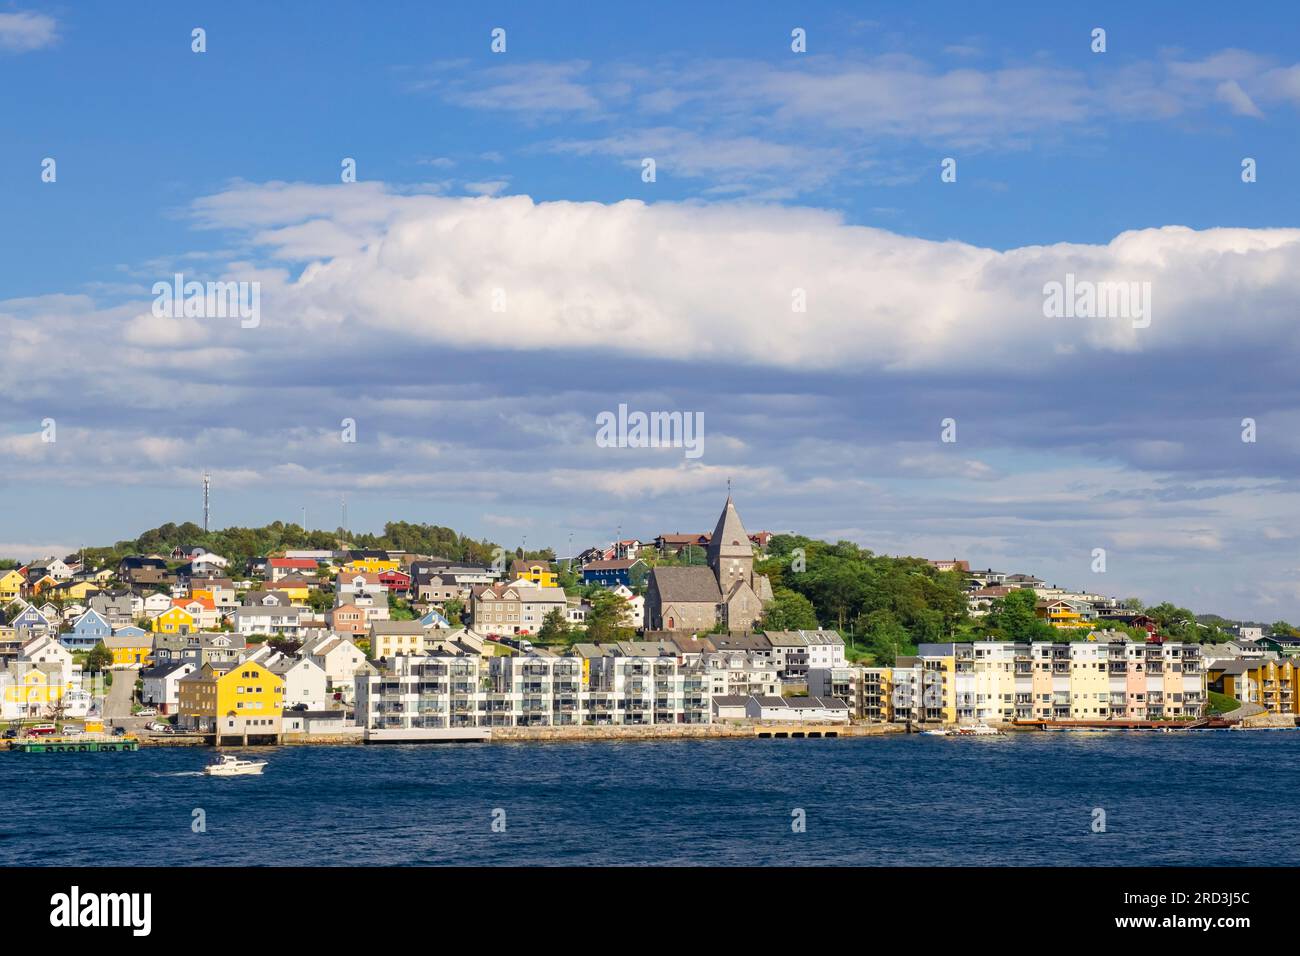 View across harbour to modern waterfront buildings and Nordlandet kirke or North Country Church on Nordlandet island. Kristiansund, Norway, Europe Stock Photo